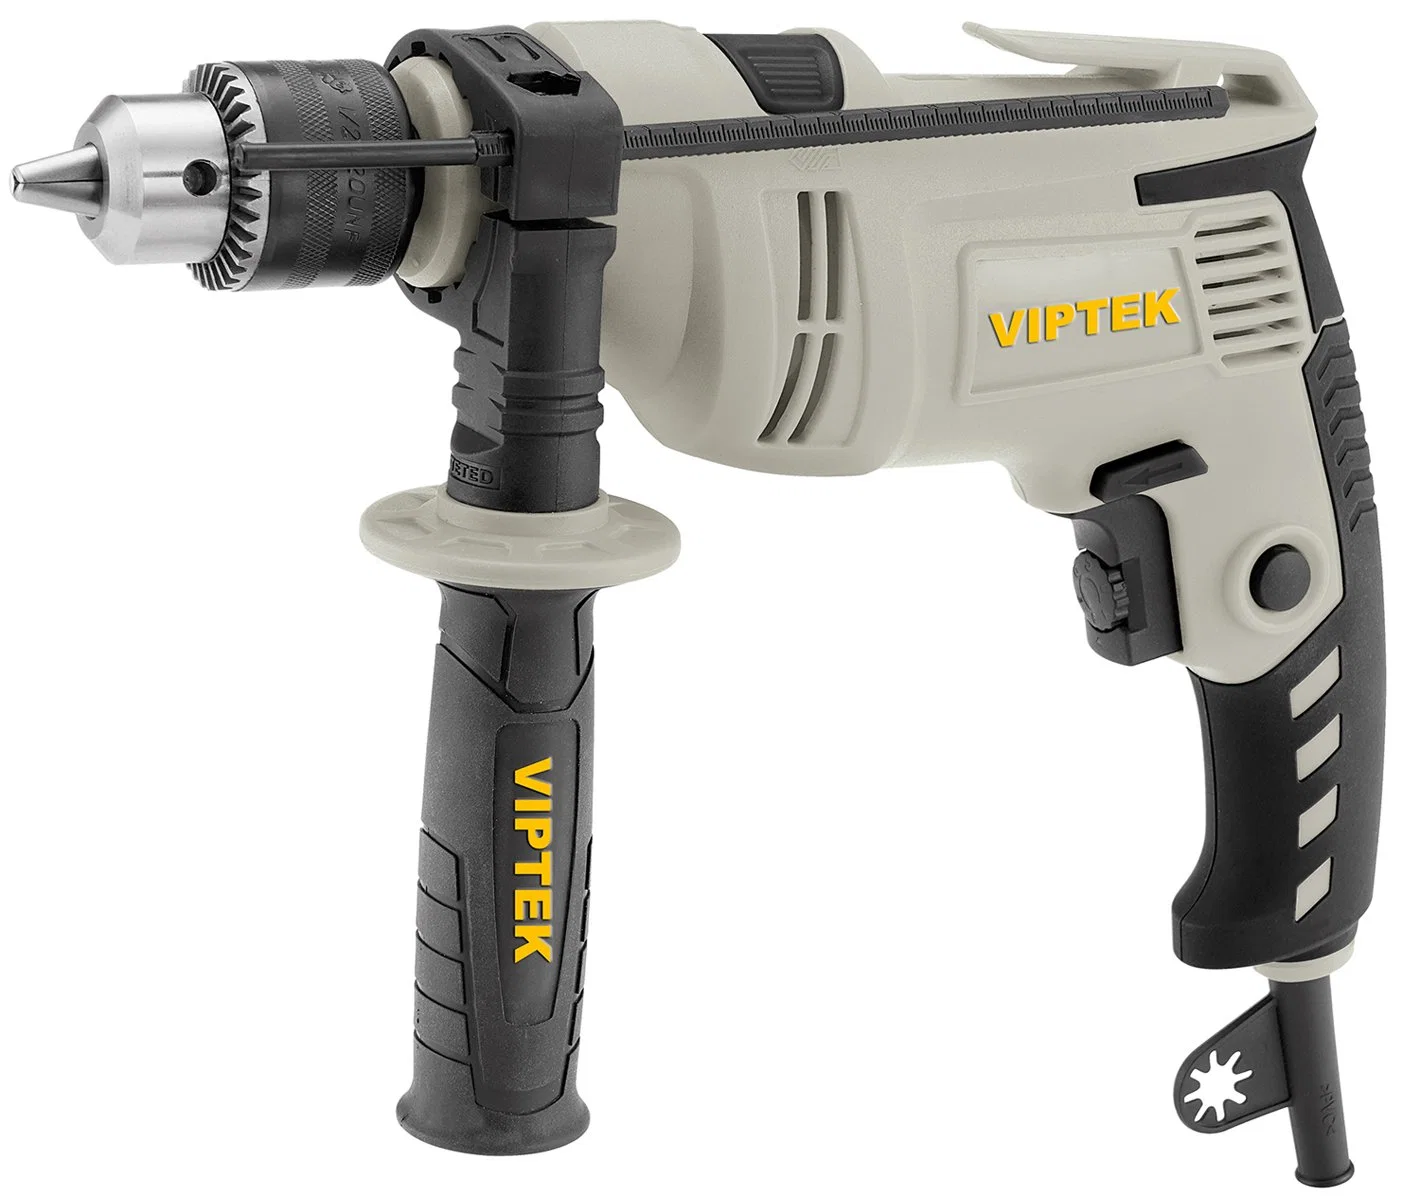 600W 13mm Professional Electric Impact Drill T13750